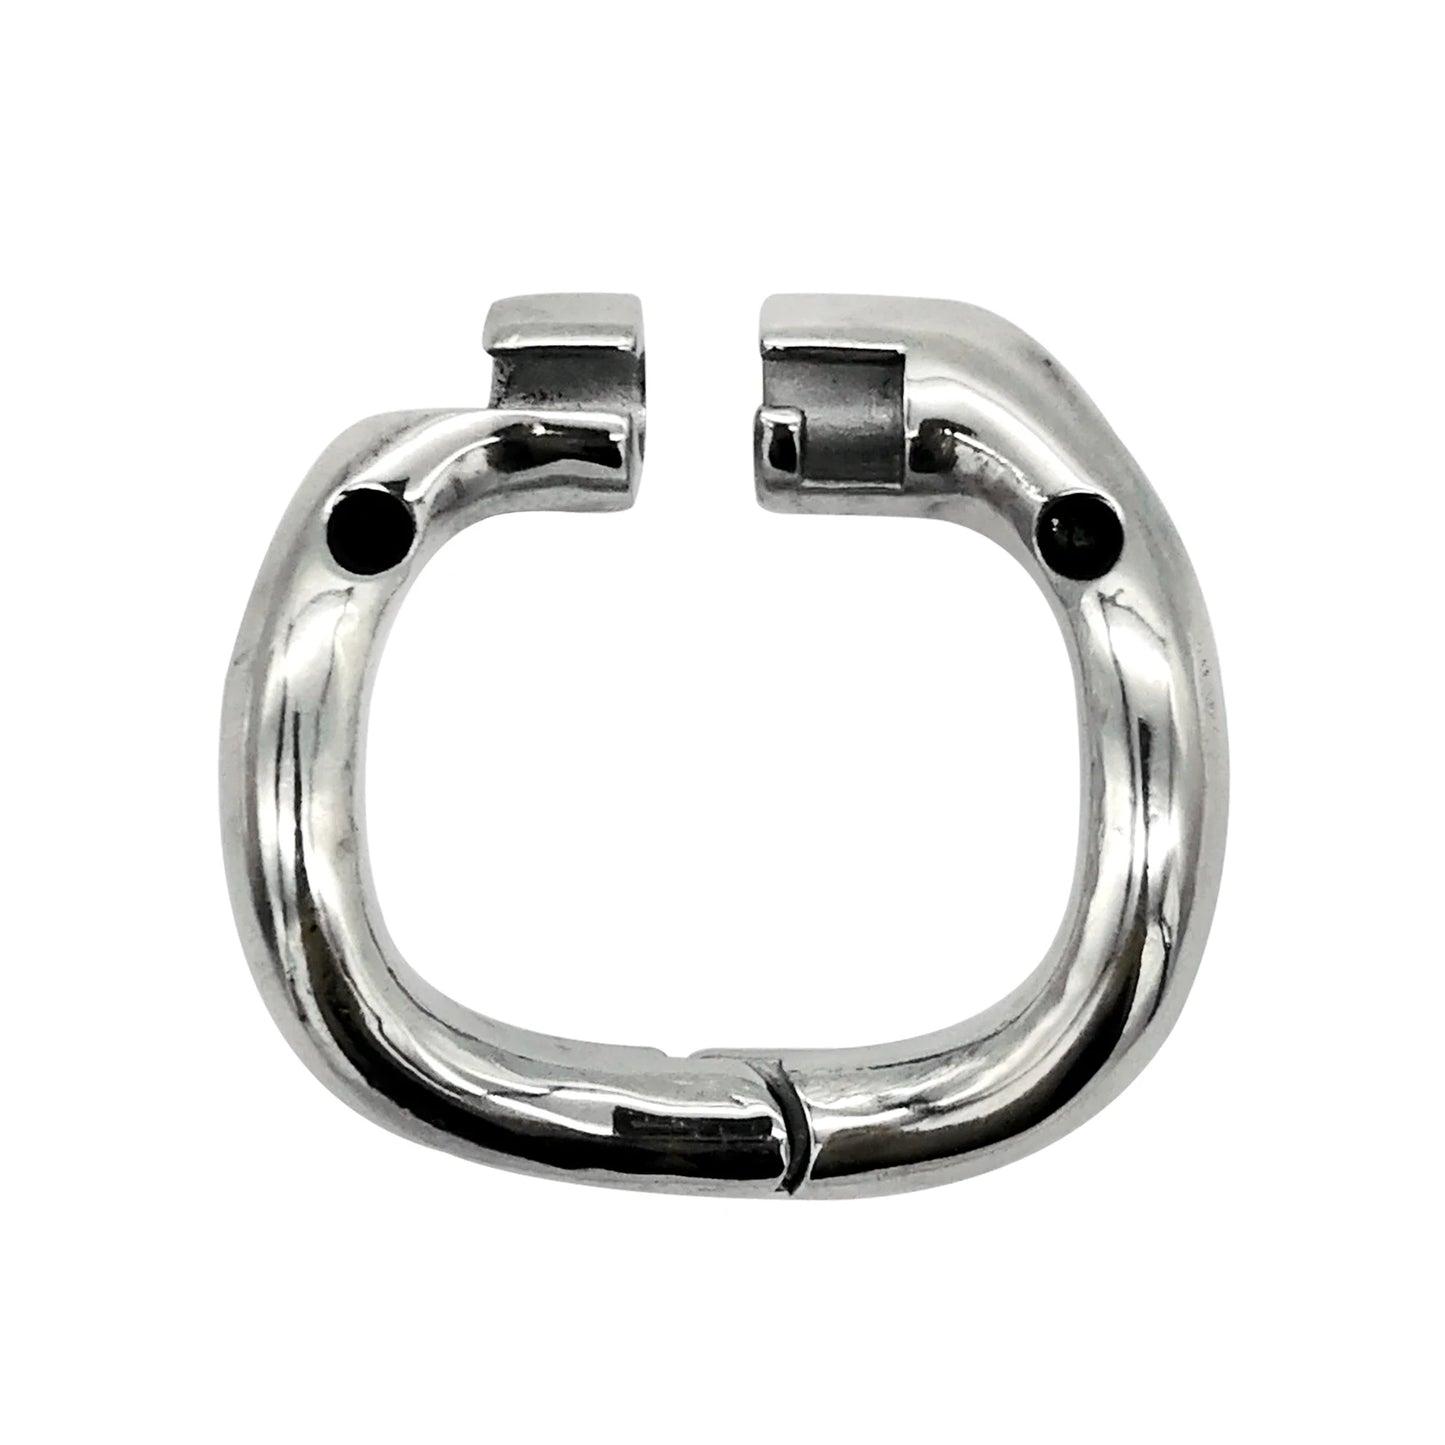 Happygo Stainless Steel Chastity Device with Urethral Catheter and Anti-Shedding Ring,Cock Cage,Penis Ring,S055-2